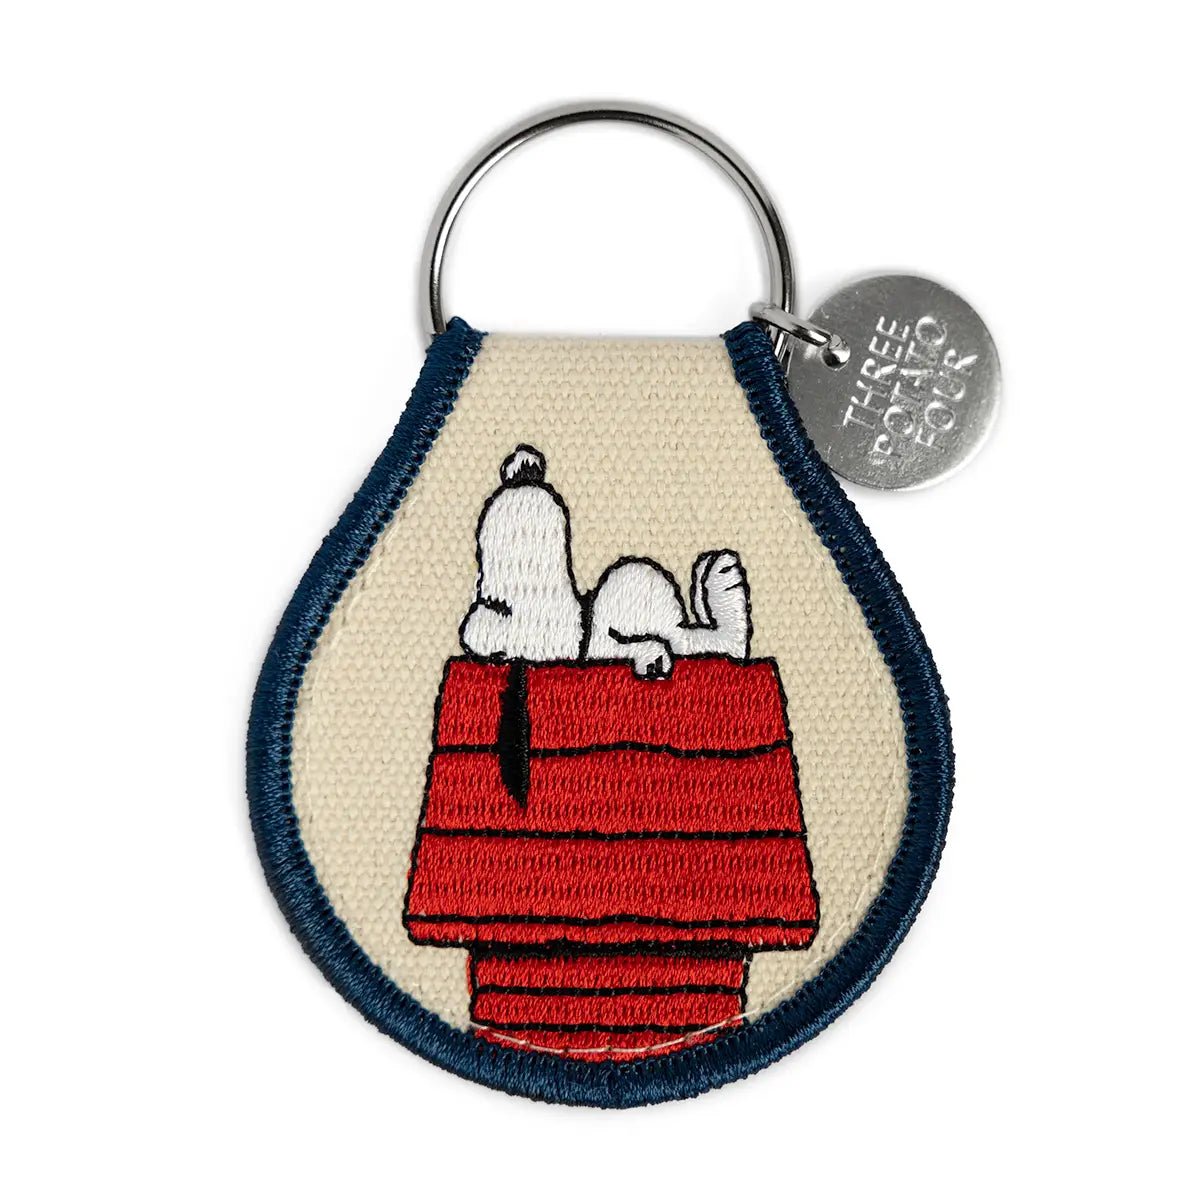 3P4 x Peanuts® - Snoopy Doghouse Patch Keychain